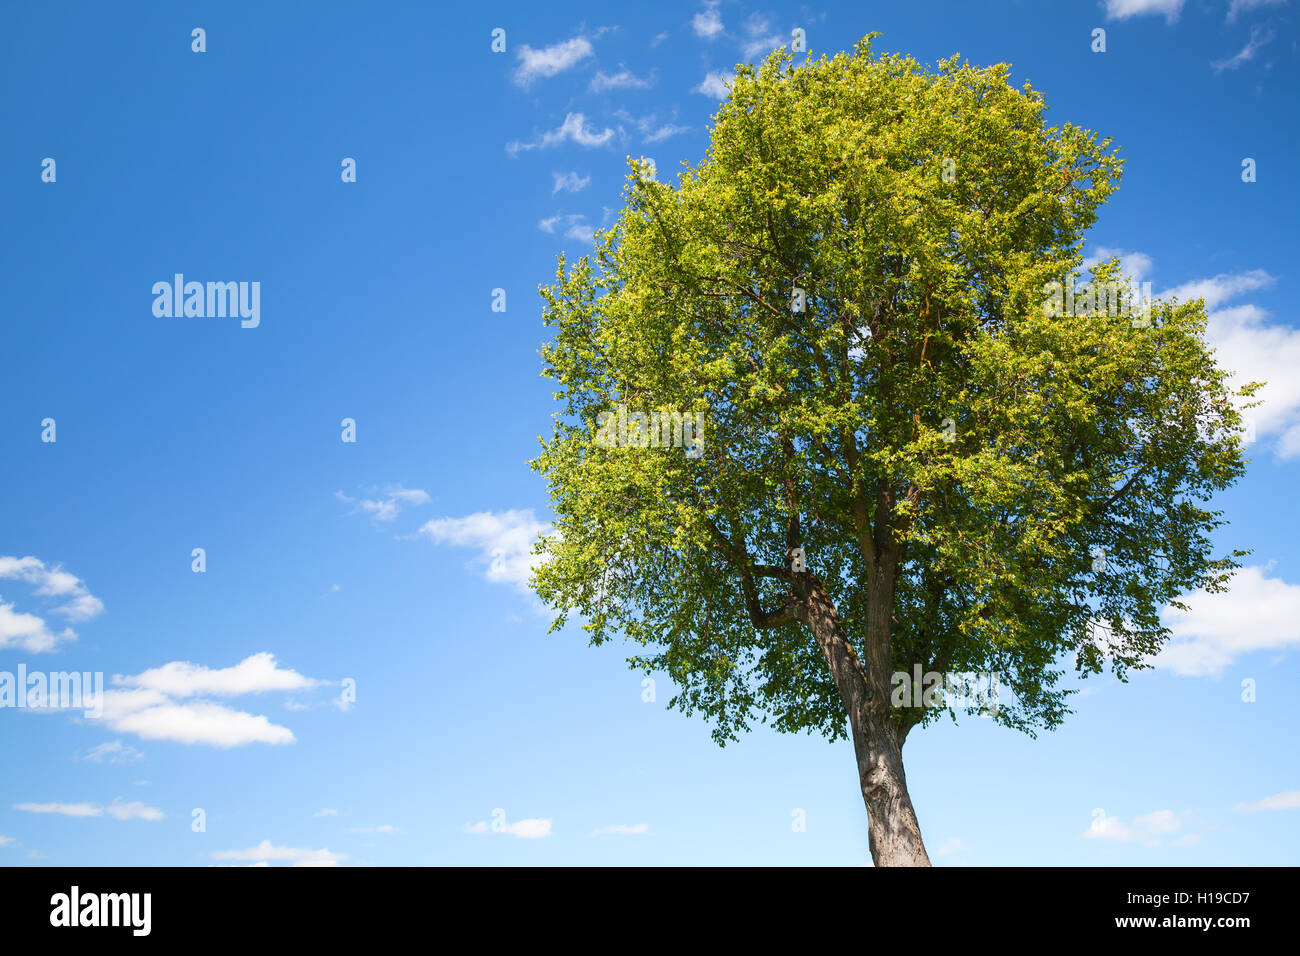 Green tree with blue sky and white clouds on a background Stock Photo